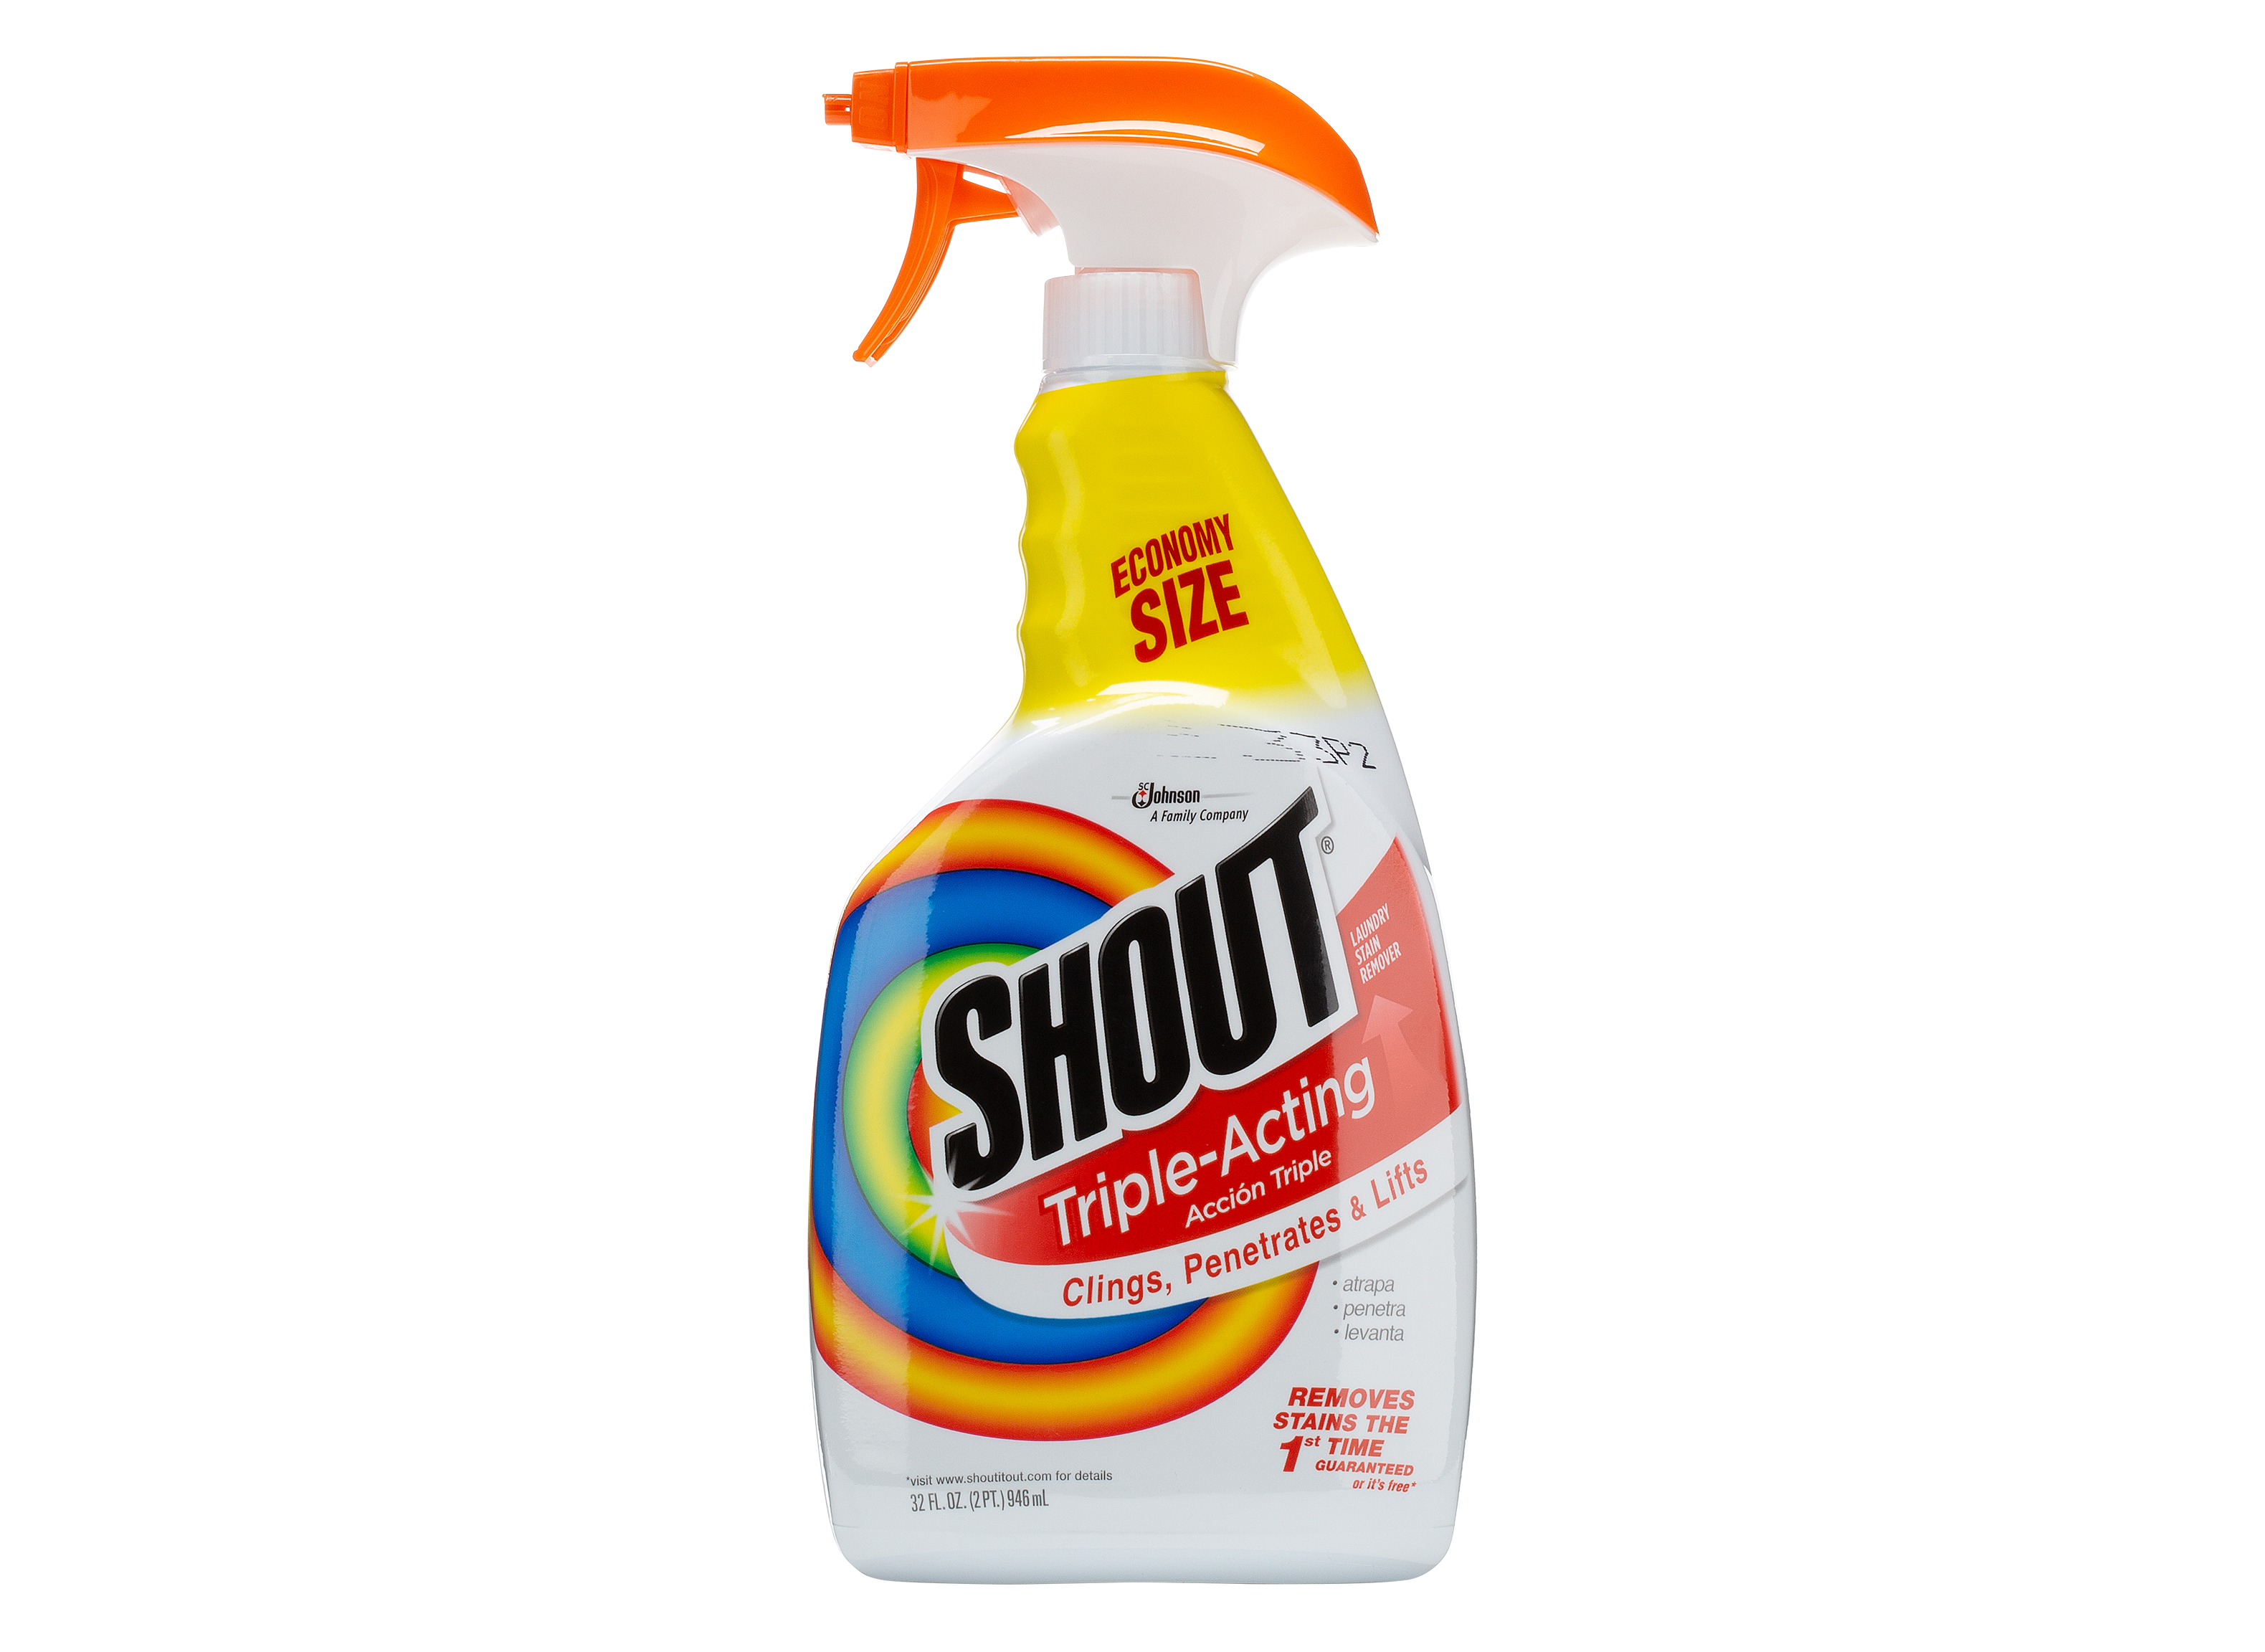 https://crdms.images.consumerreports.org/prod/products/cr/models/398388-laundry-stain-removers-shout-triple-acting-10008904.png